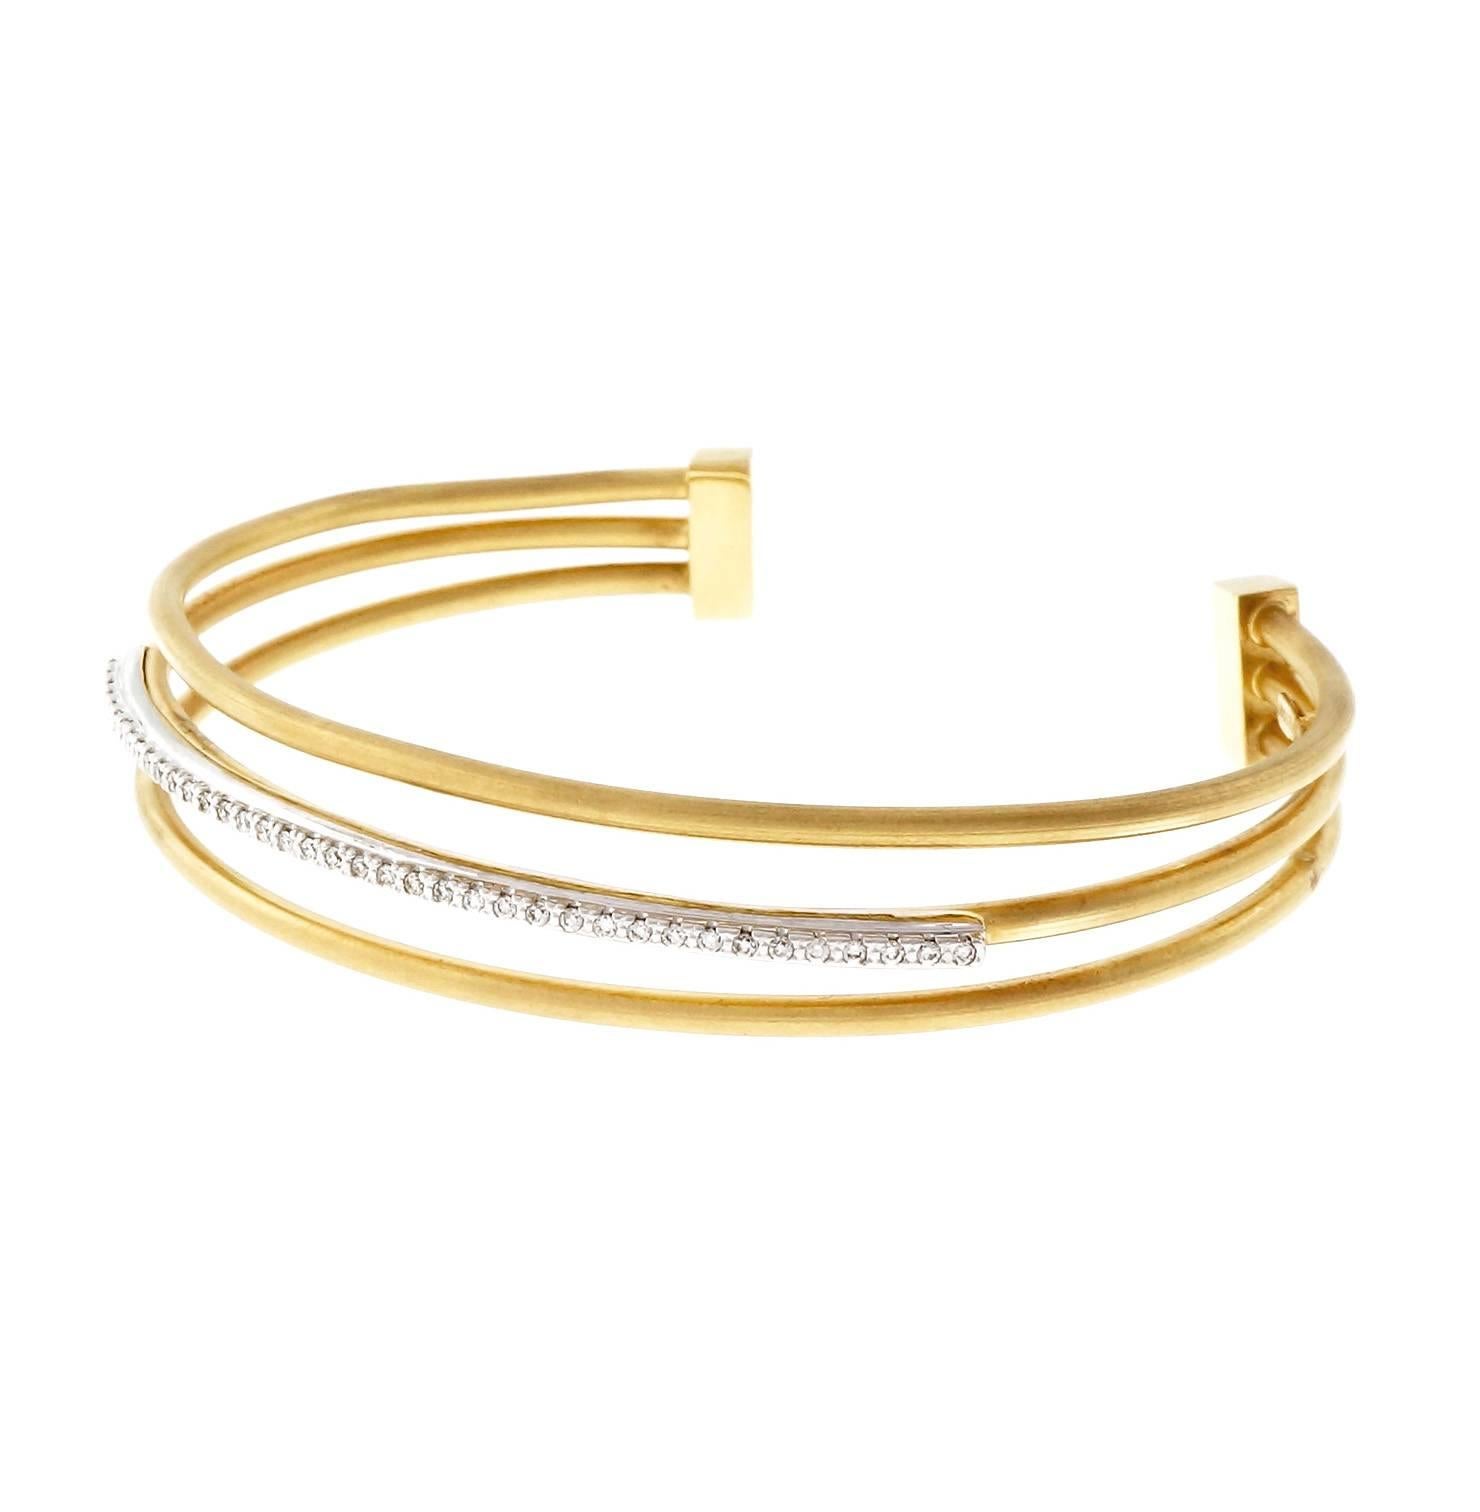 Designer Isaac Reiss 3 row diamond center row slip on bangle bracelet.

39 round diamonds, approx. total weight .33cts, G – H, VS
14k yellow and white gold
Tested and stamped: 14k
Hallmark: I. Reiss
14.0 grams
Fits a standard 7 to 7 1/2 inch